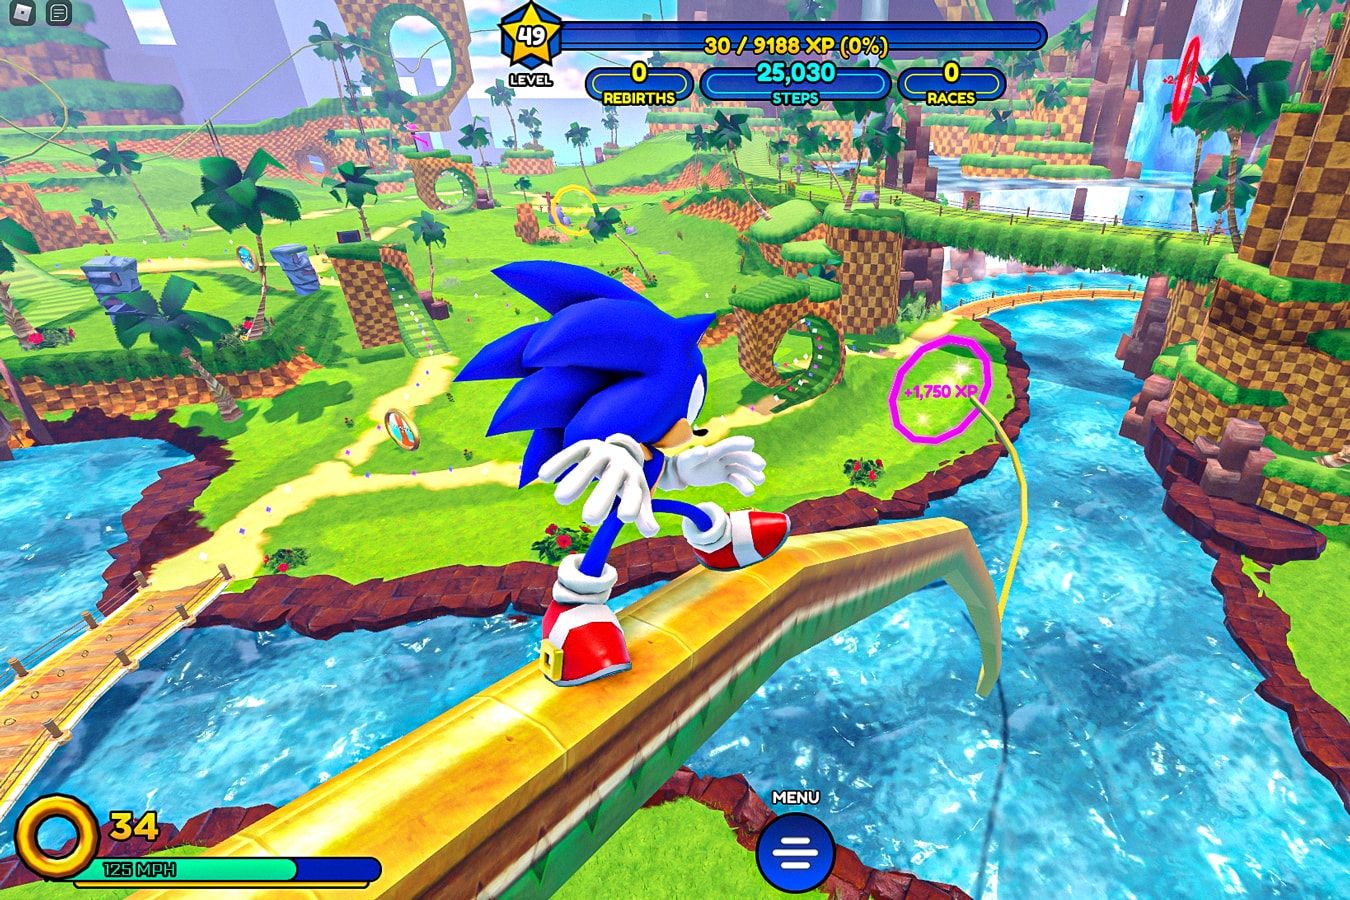 Gamefam In-Game Activations for Brands in Metaverse concerts roblox sonic 24kgldn virtual goods